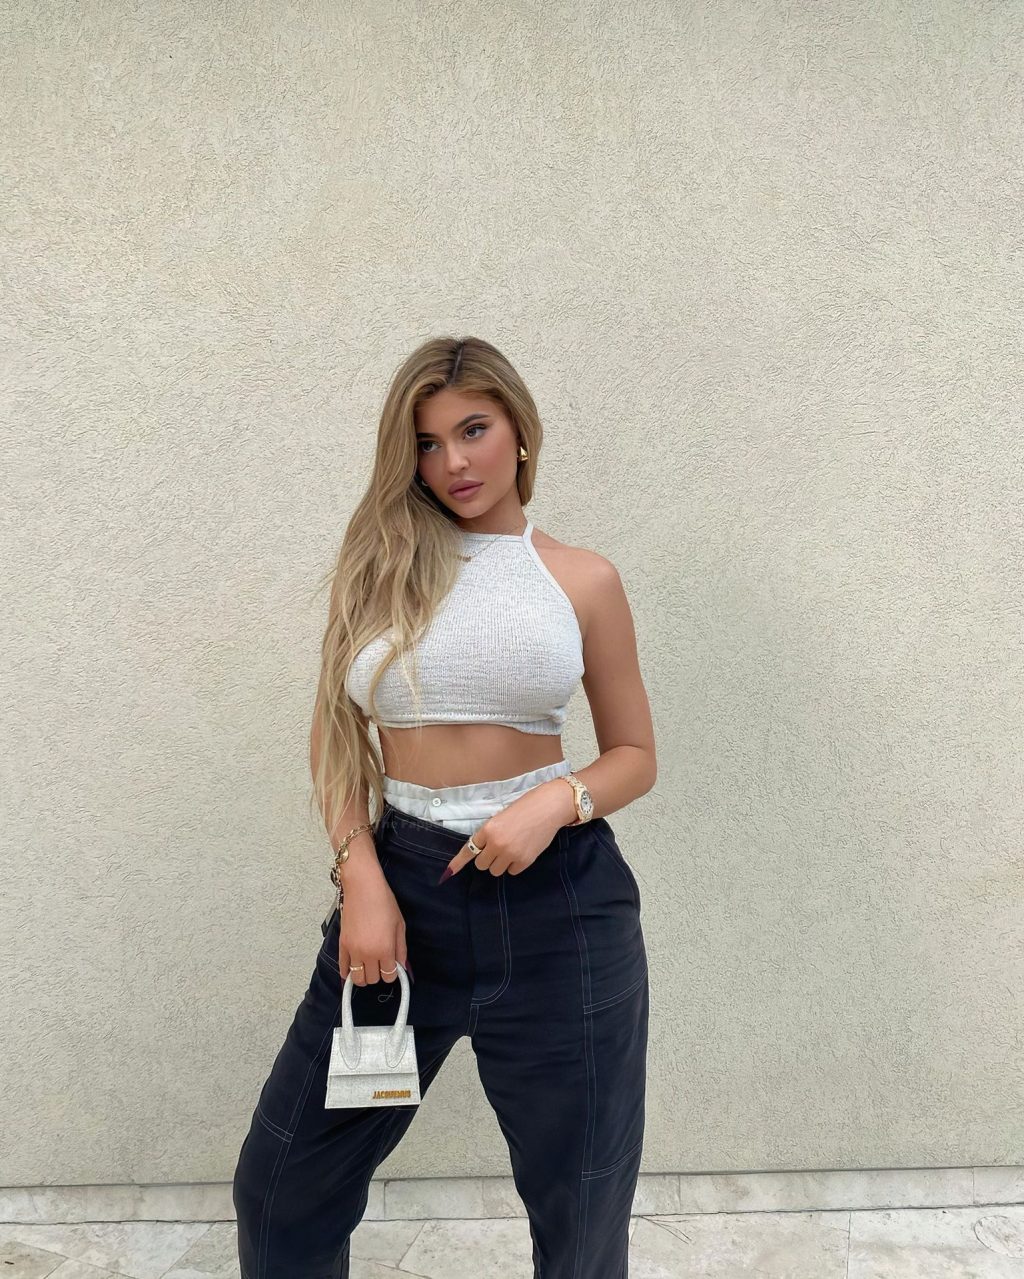 Kylie Jenner Braless (6 New Photos)